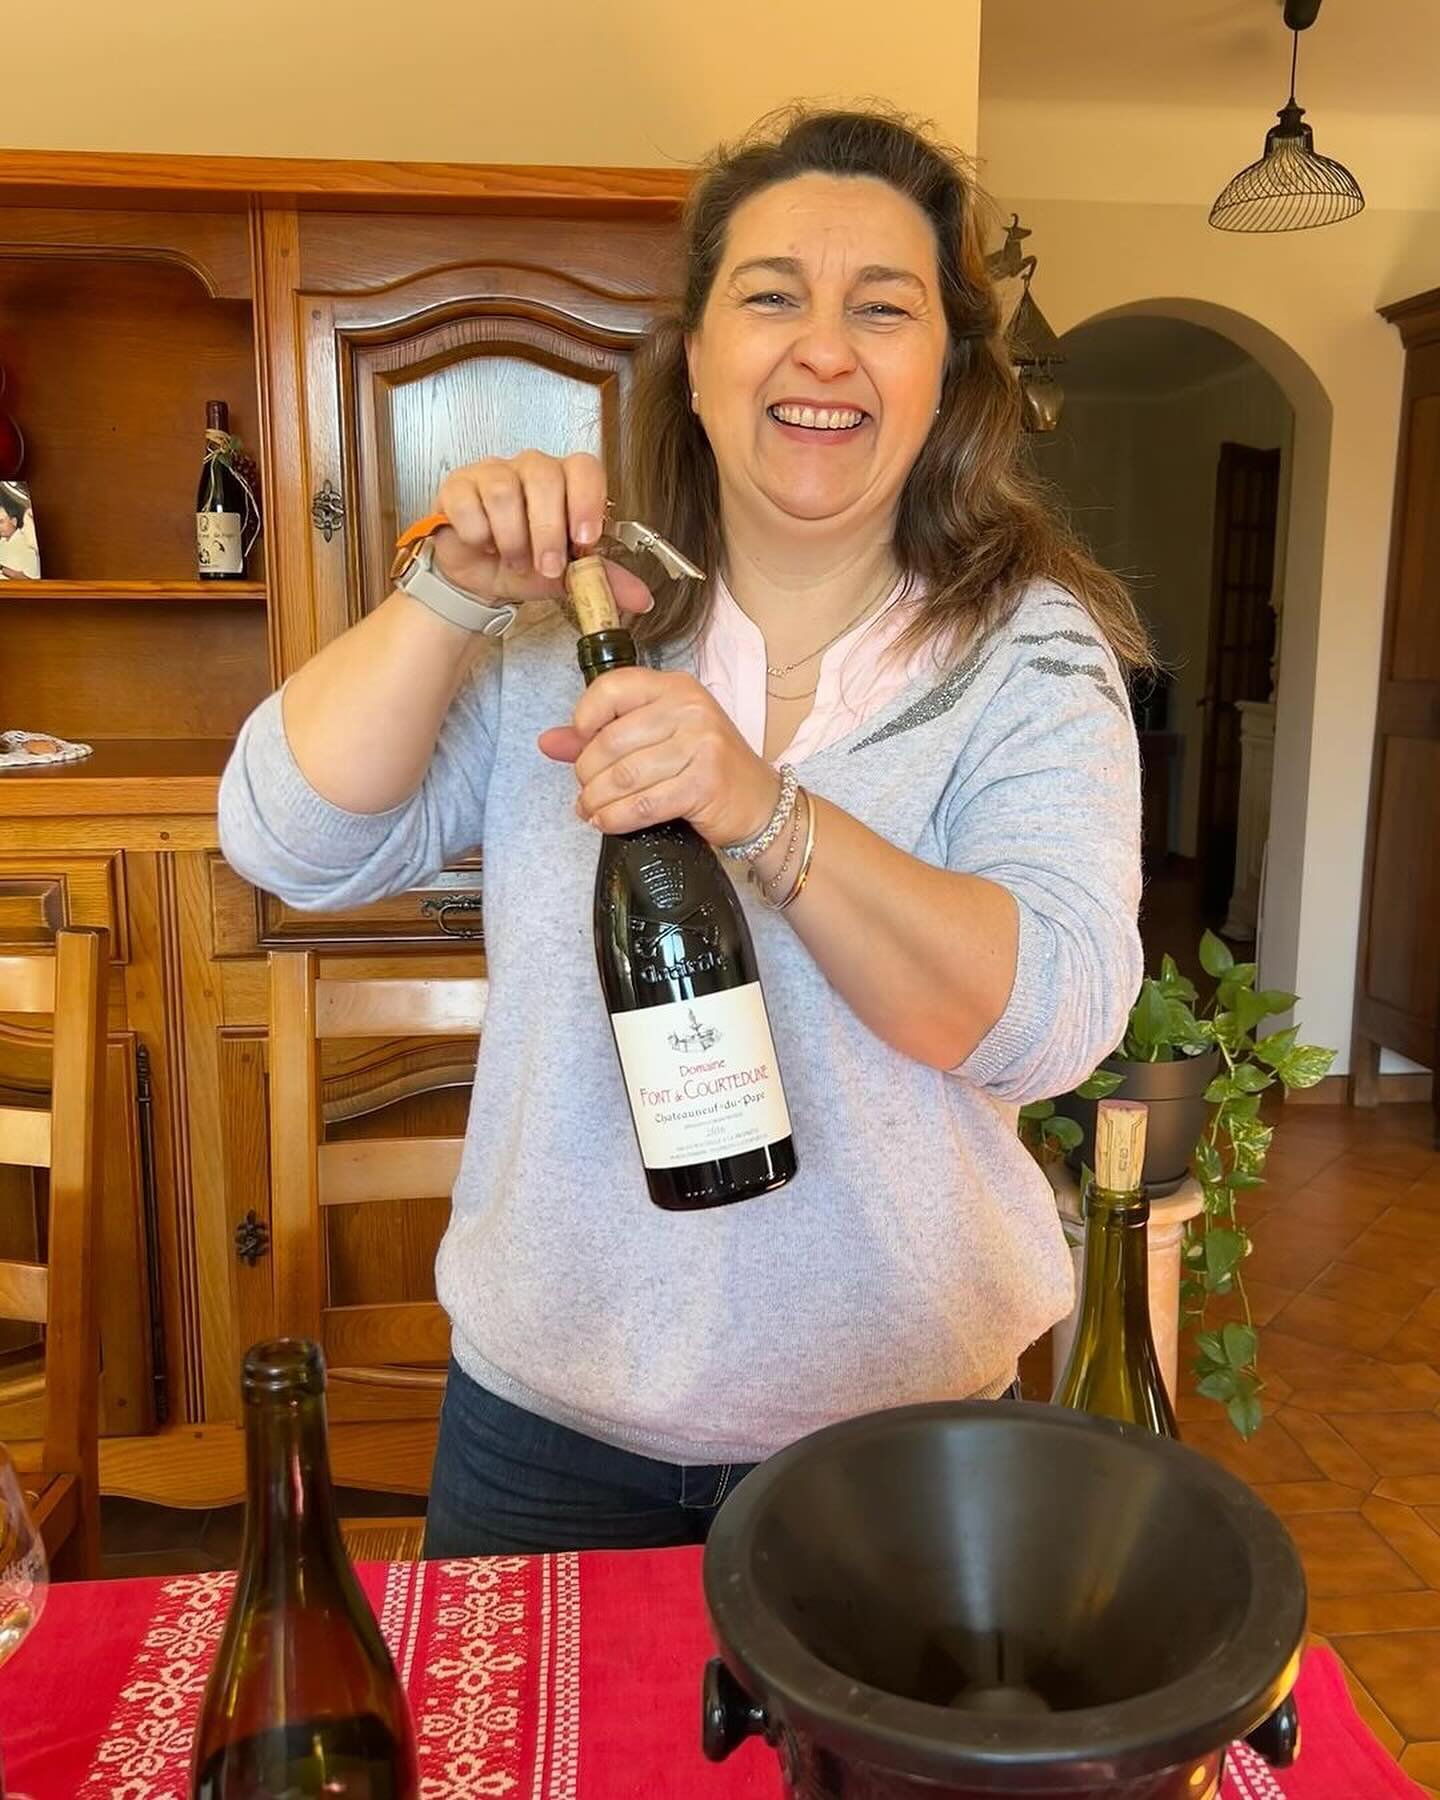 A lot of producers in Ch&acirc;teauneuf-du-Pape talk about their sandy soils and being next to Rayas. Caroline Charrier has the proof in the bottle. Font de Courtedune is one our most exciting new CDP producers. All old-vine holdings in both C&ocirc;